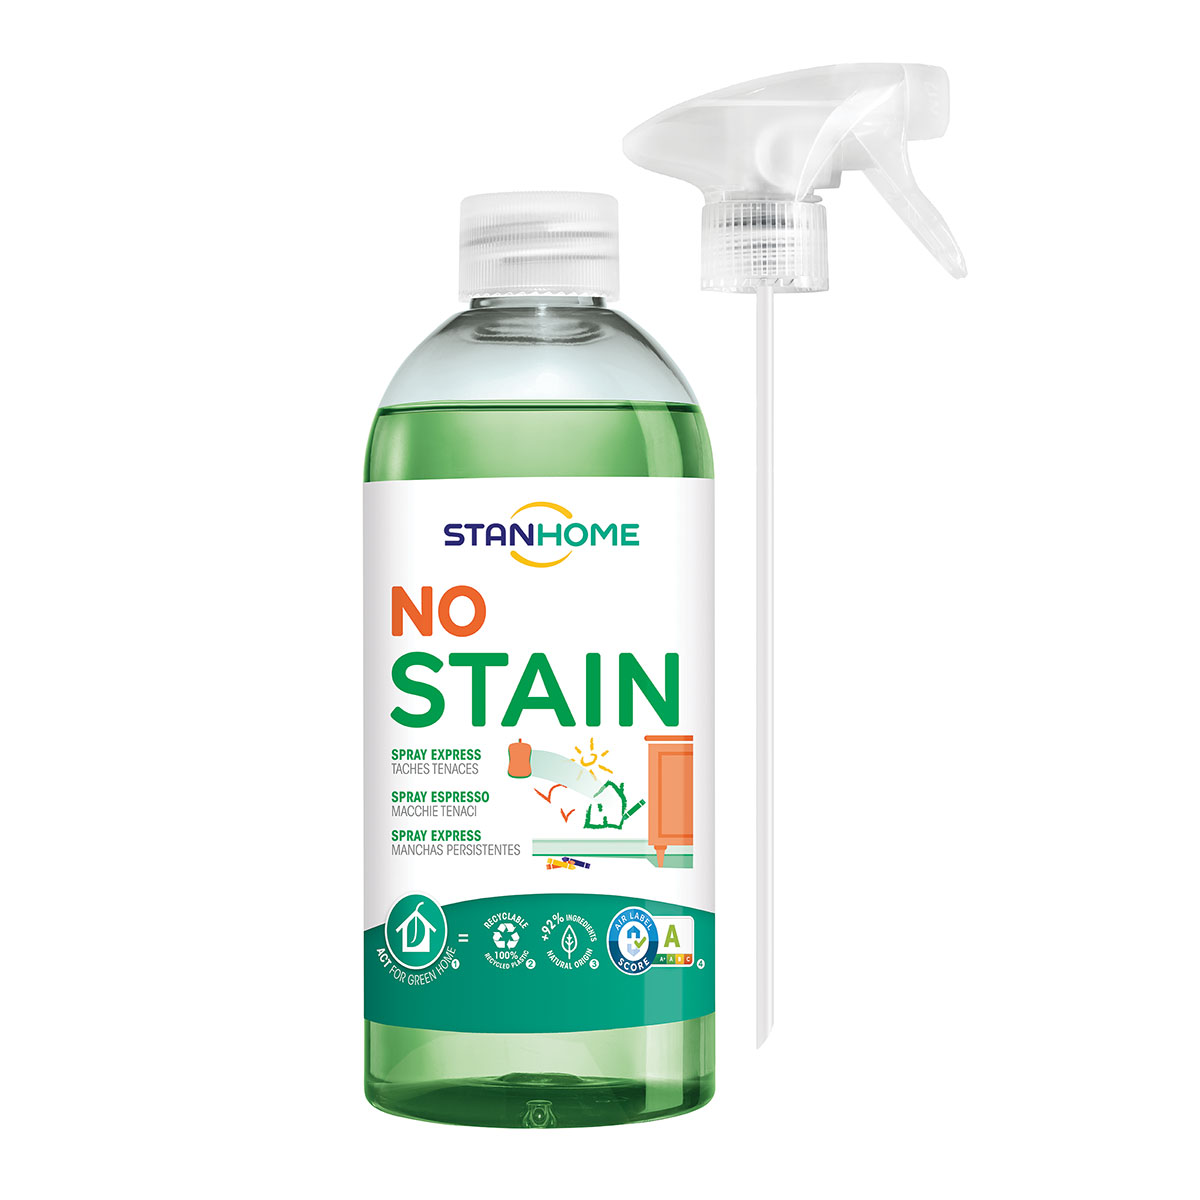 NO STAIN